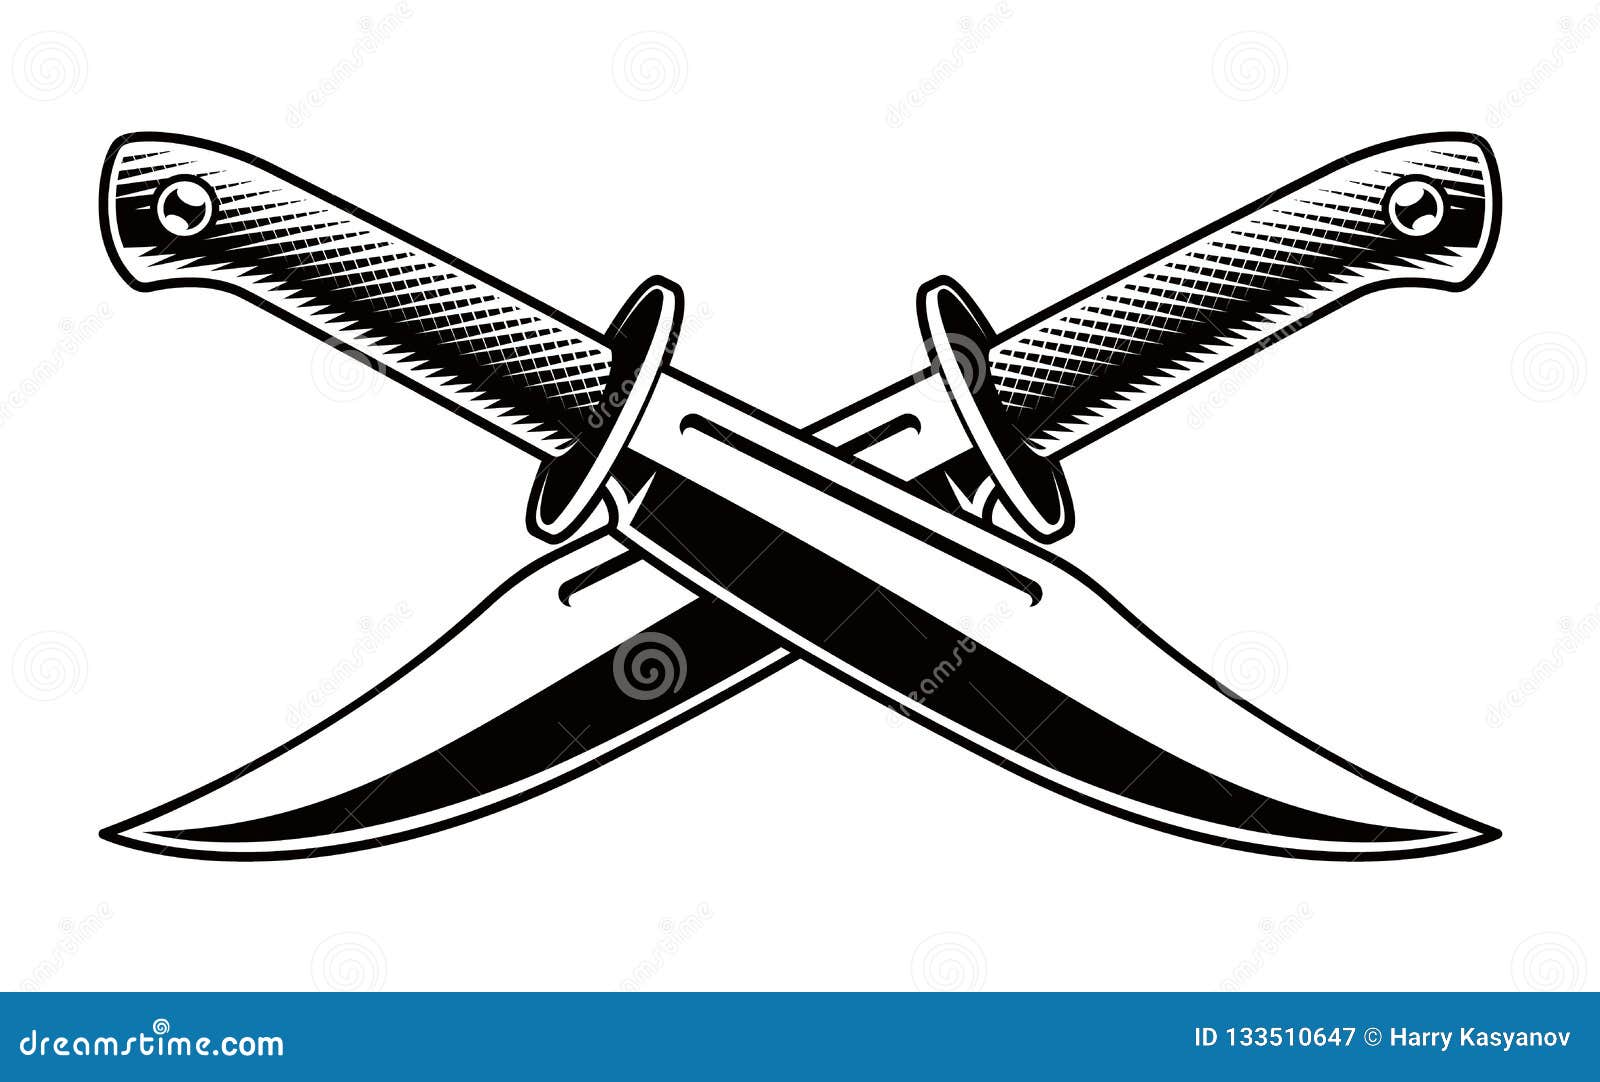   of crossed knives on white background